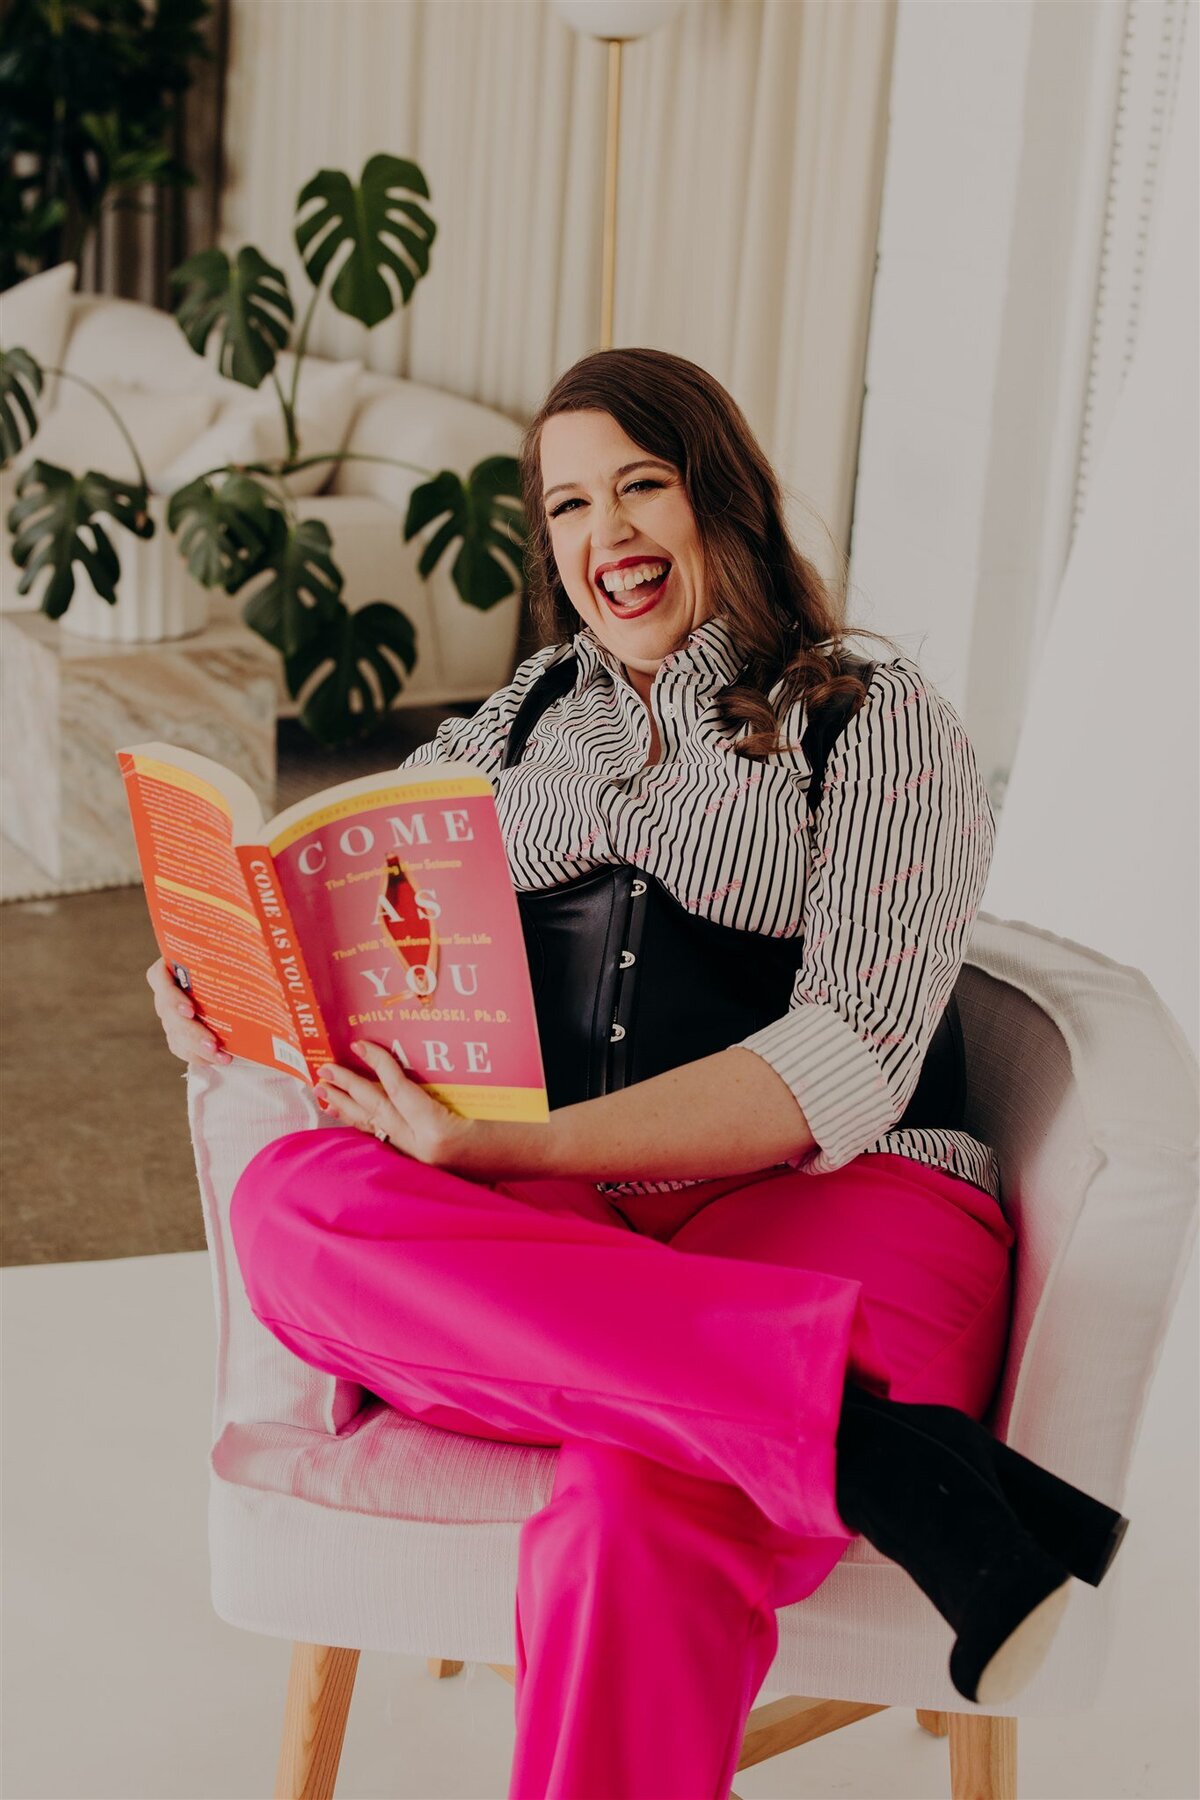 woman sitting in a chair holding come as you are book while smiling